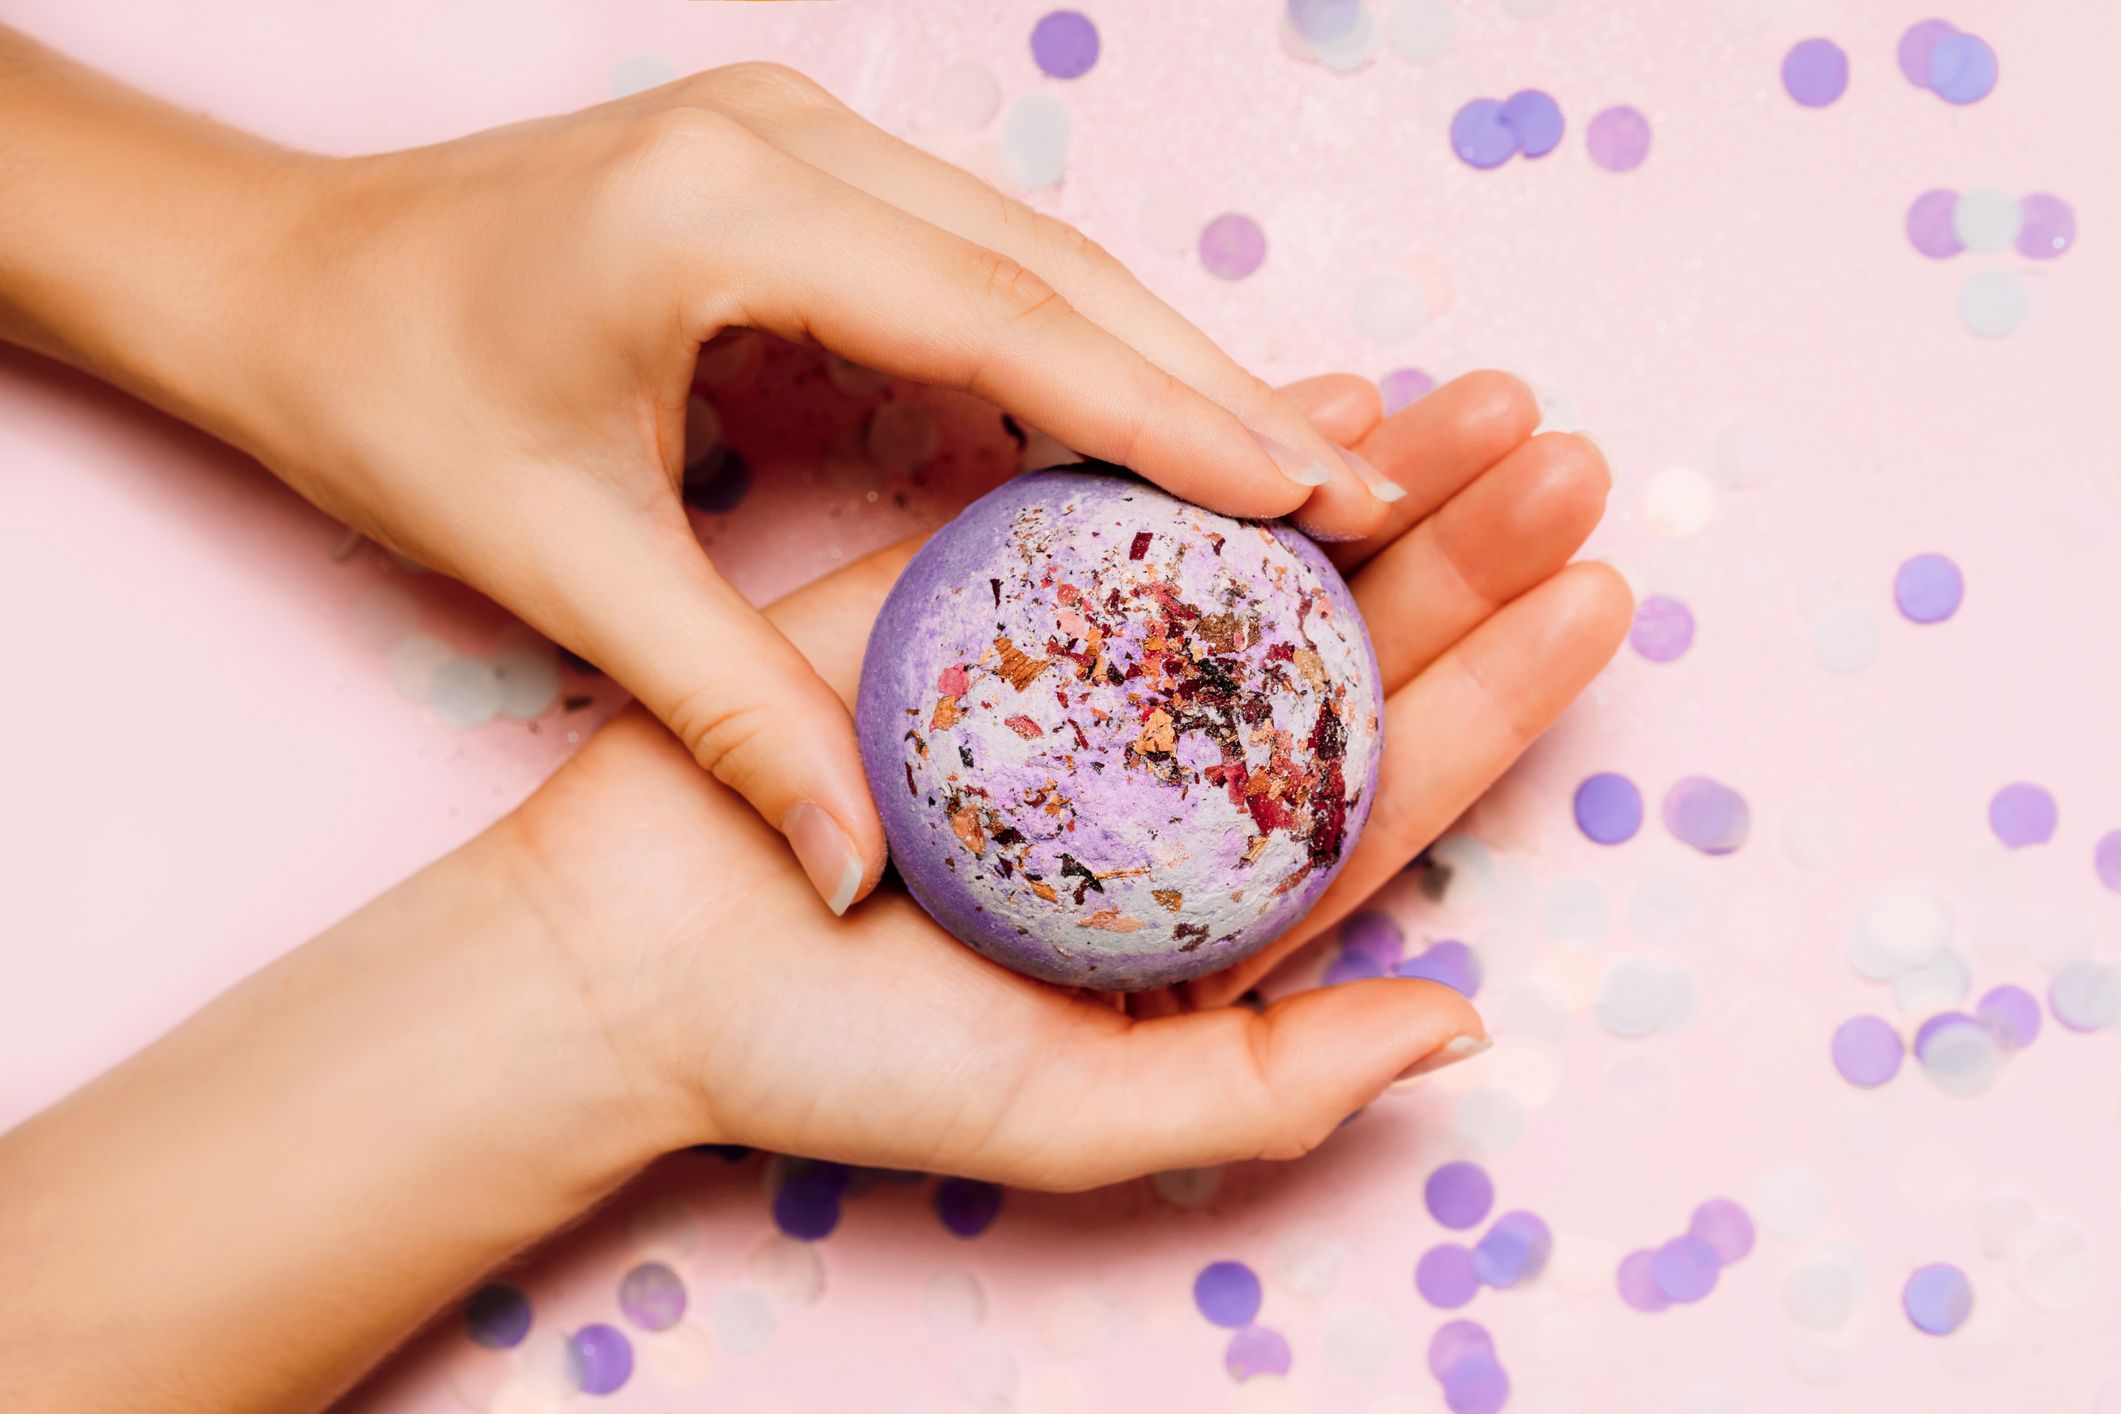 How to Make Essential Oil Bath Bombs Without Citric Acid